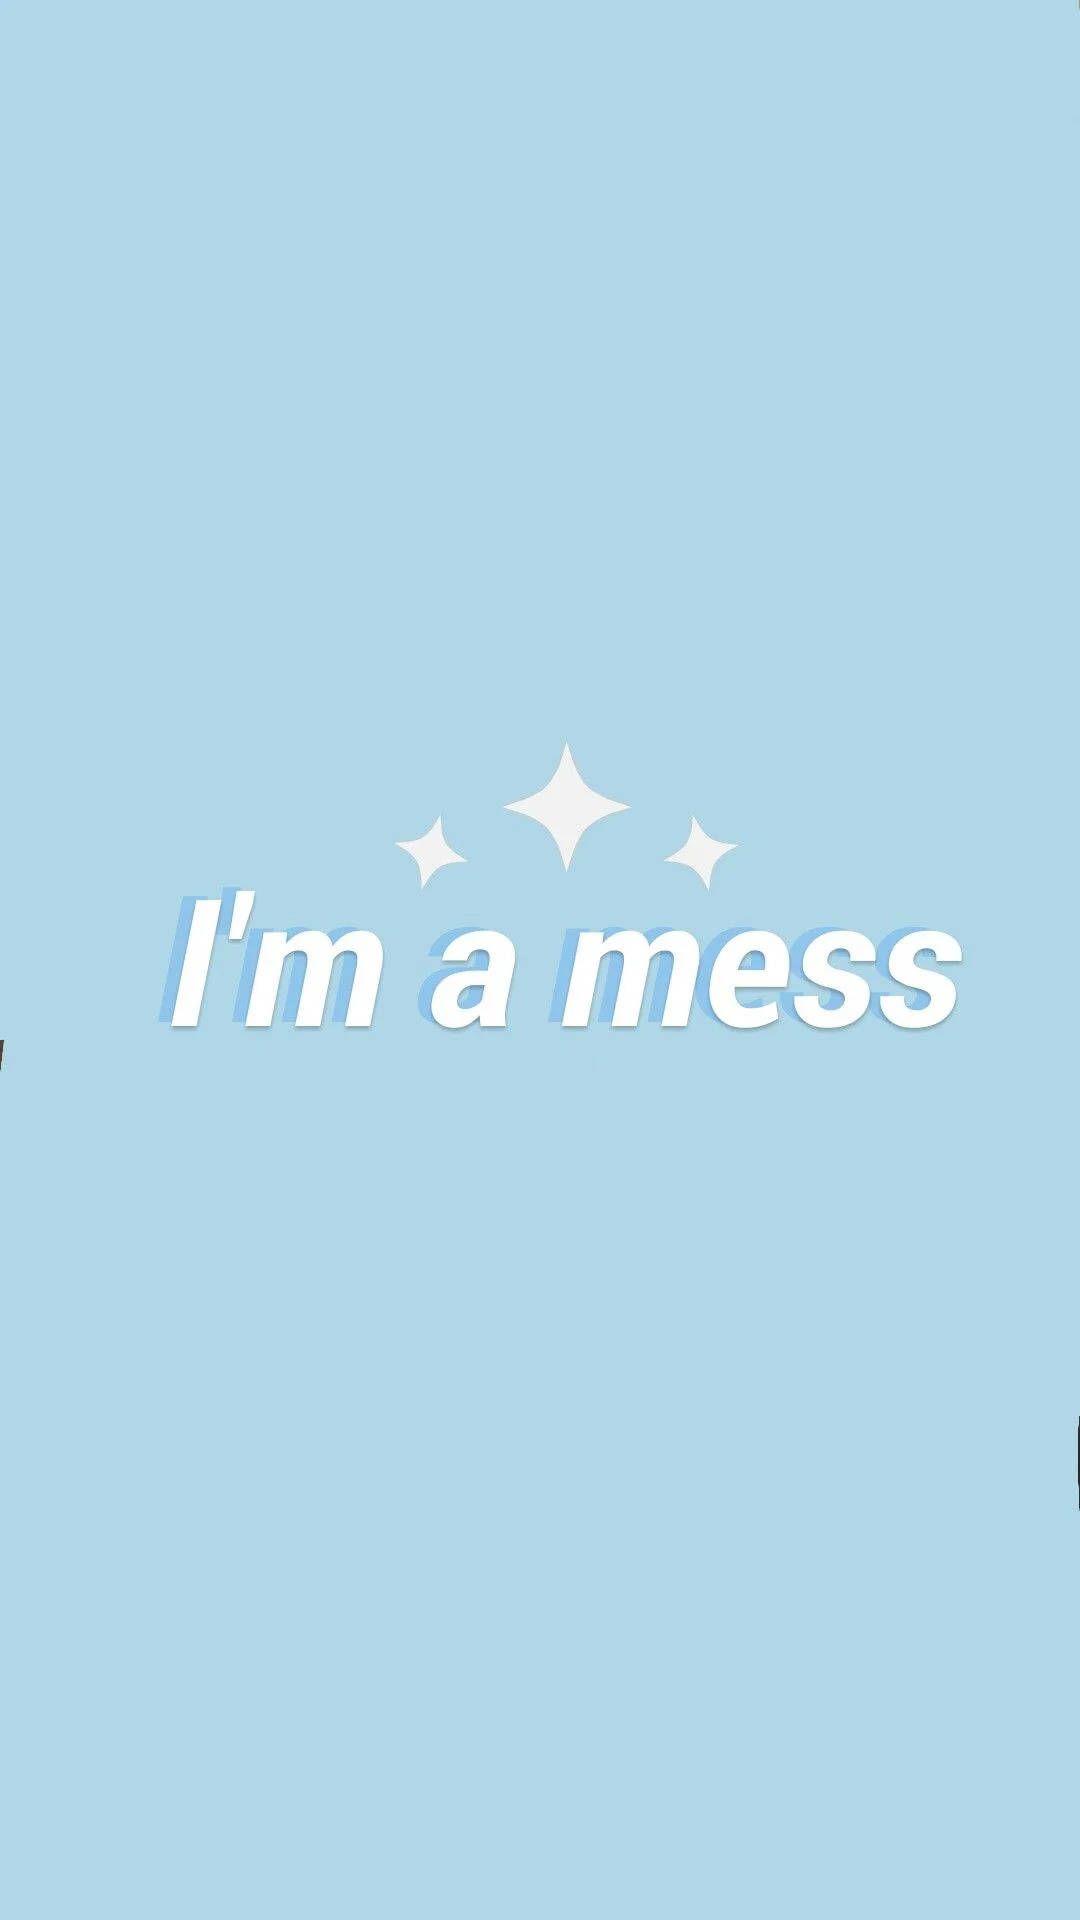 I'm a mess blue aesthetic wallpaper for phone - Blue